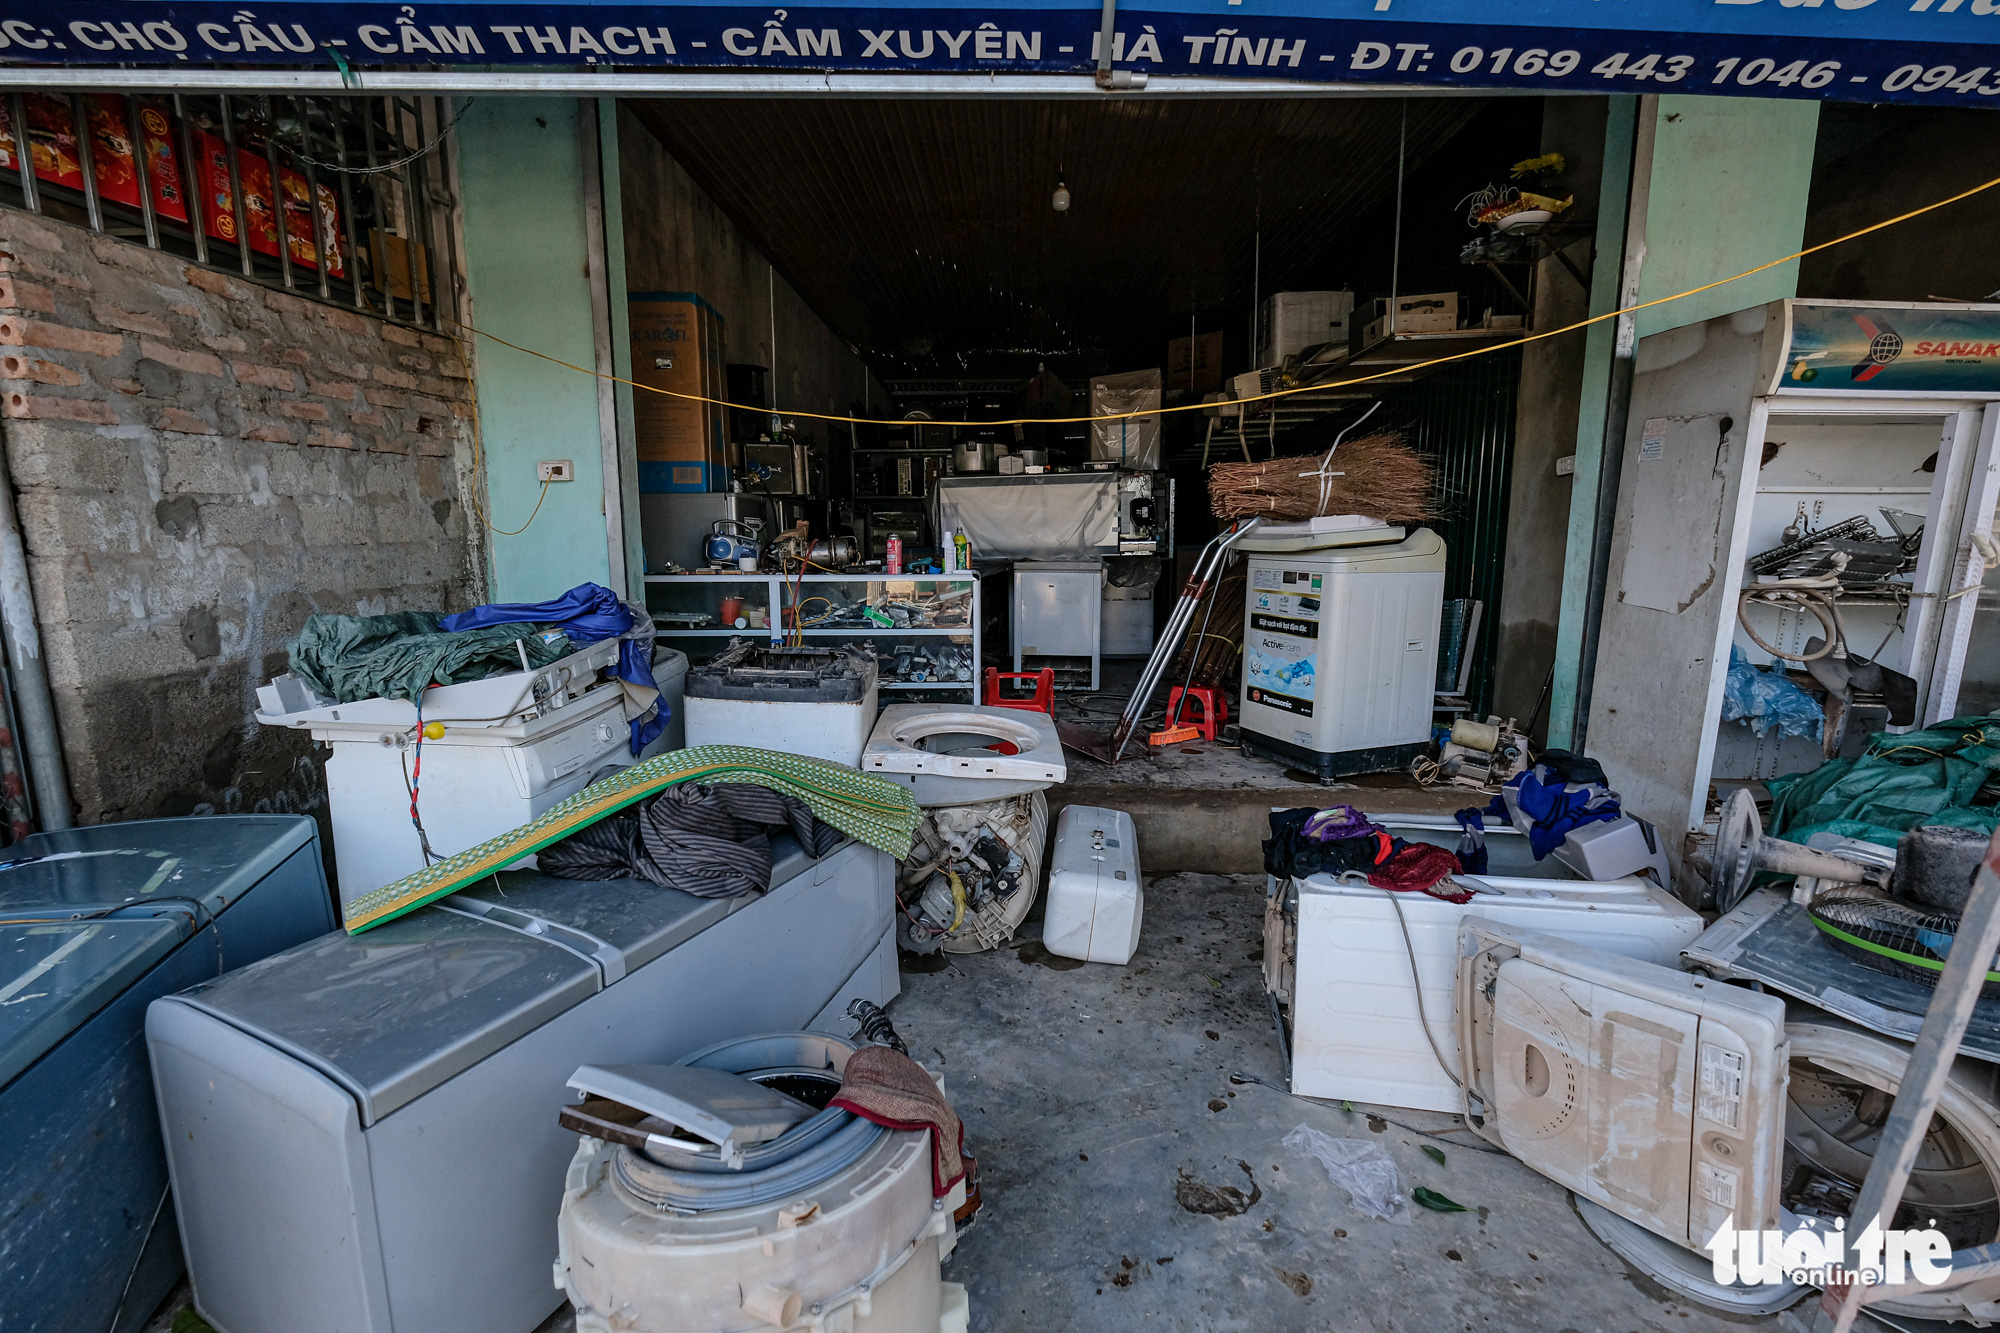 Household appliances are pictured at a repair shop in Ha Tinh Province, Vietnam, October 22, 2020. Photo: Nam Tran / Tuoi Tre